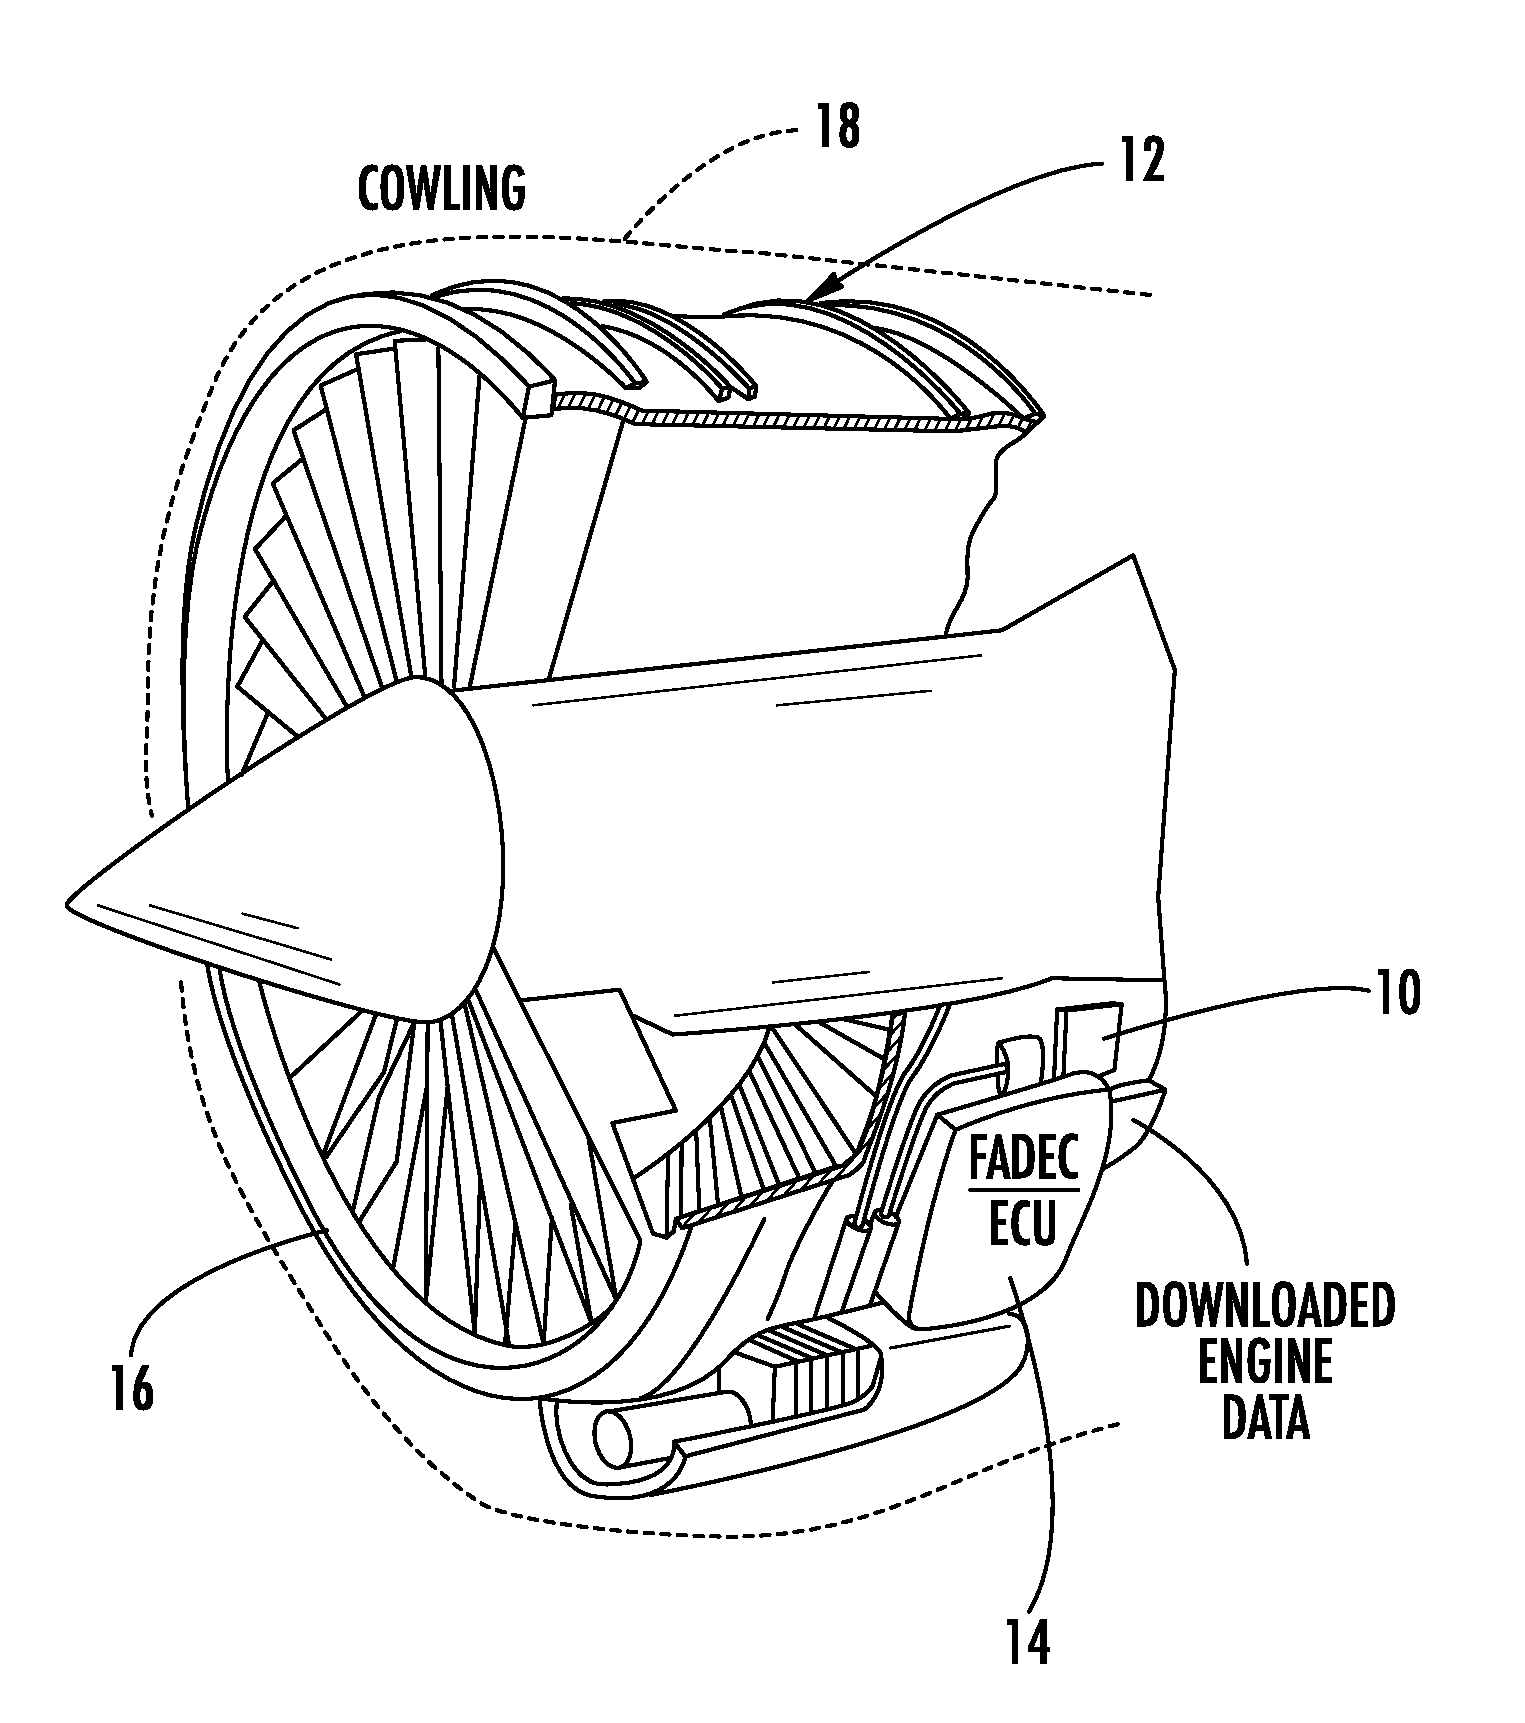 Wireless engine monitoring system with multiple hop aircraft communications capability and on-board processing of engine data